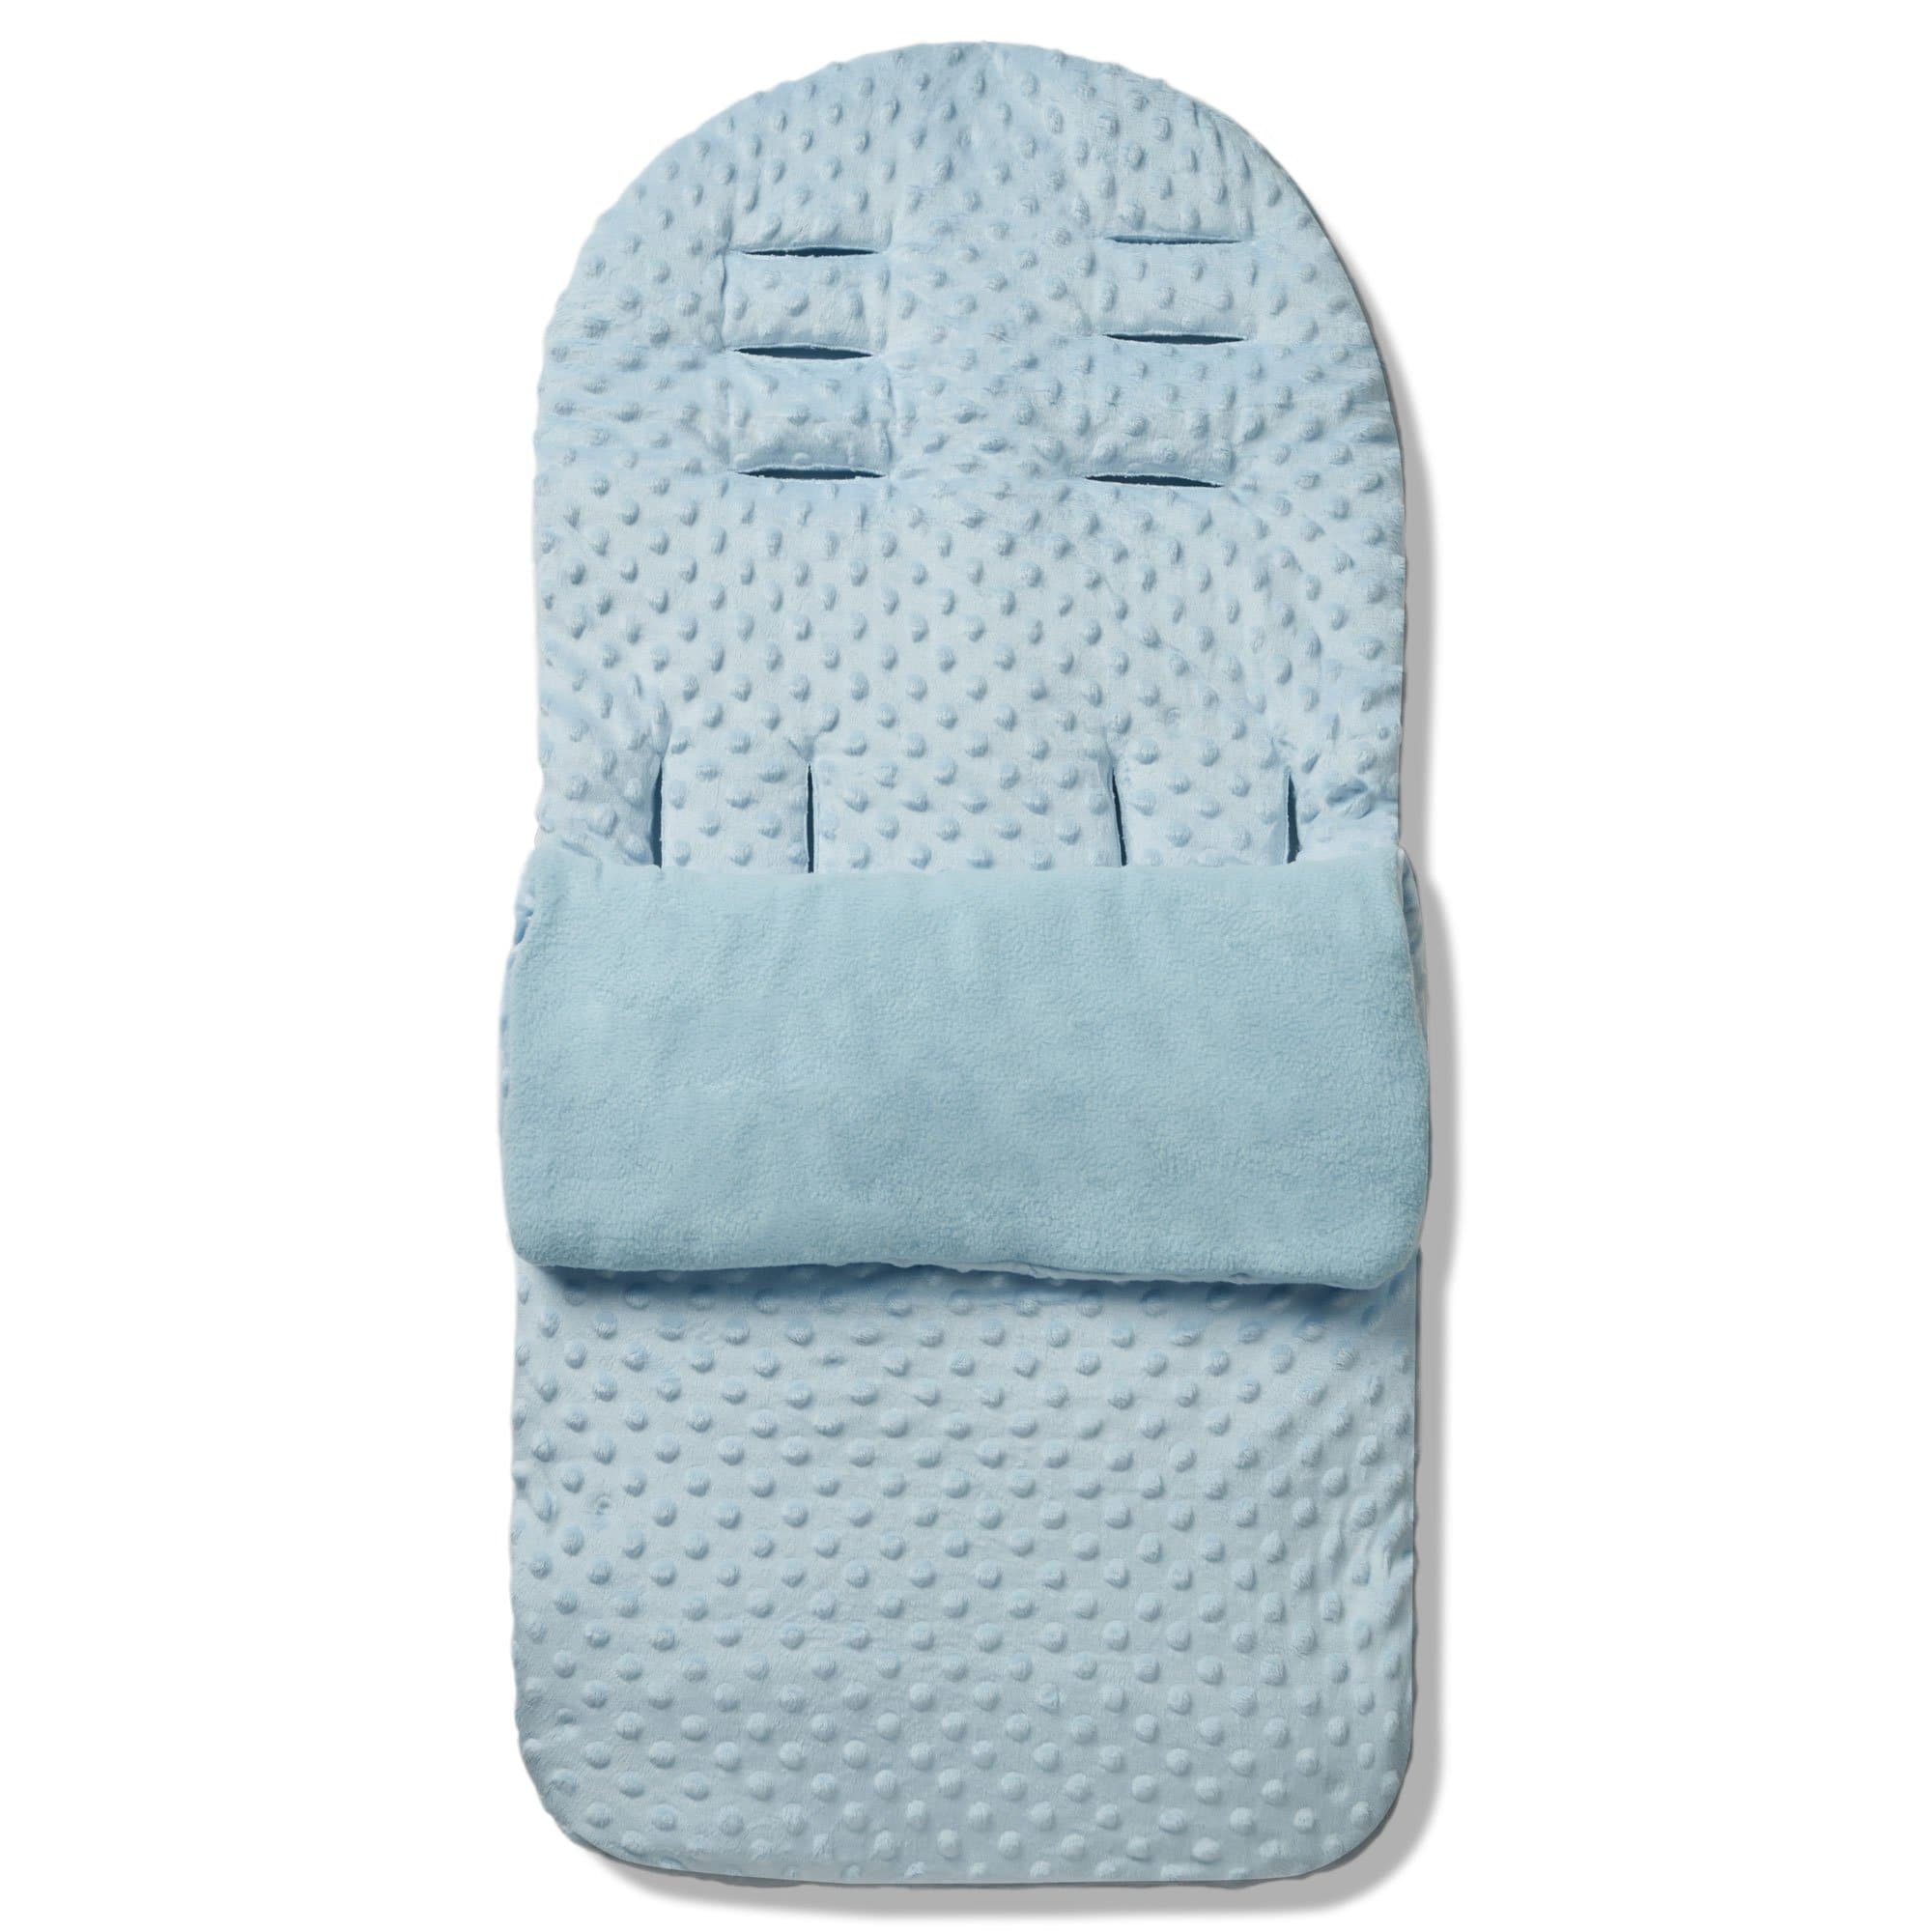 Dimple Footmuff / Cosy Toes Compatible with Teutonia - Blue / Fits All Models | For Your Little One